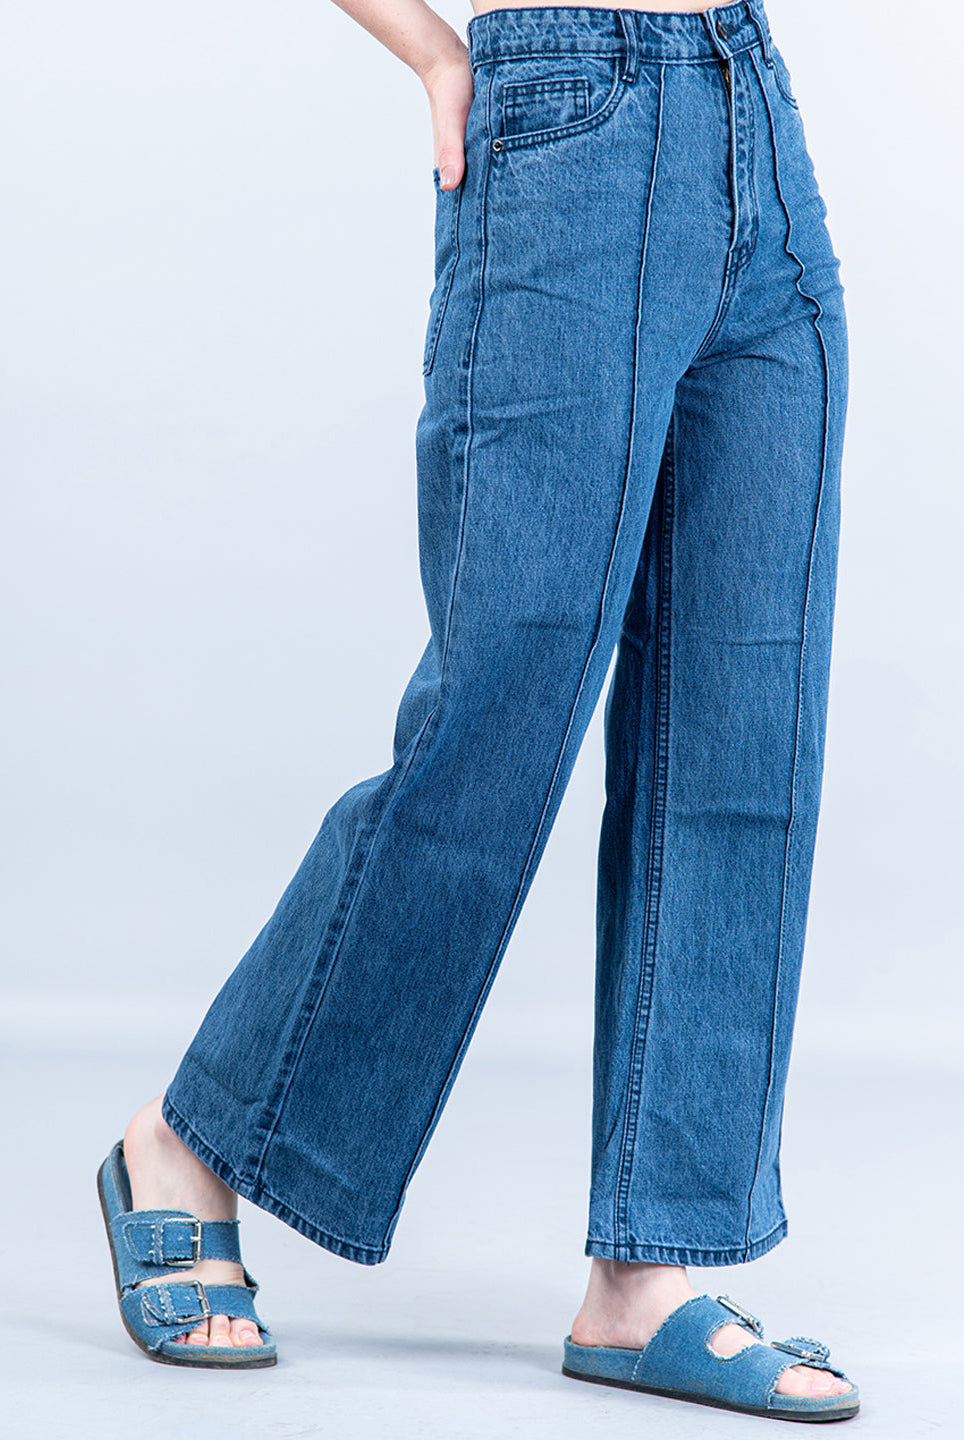 stretchable jeans for ladies